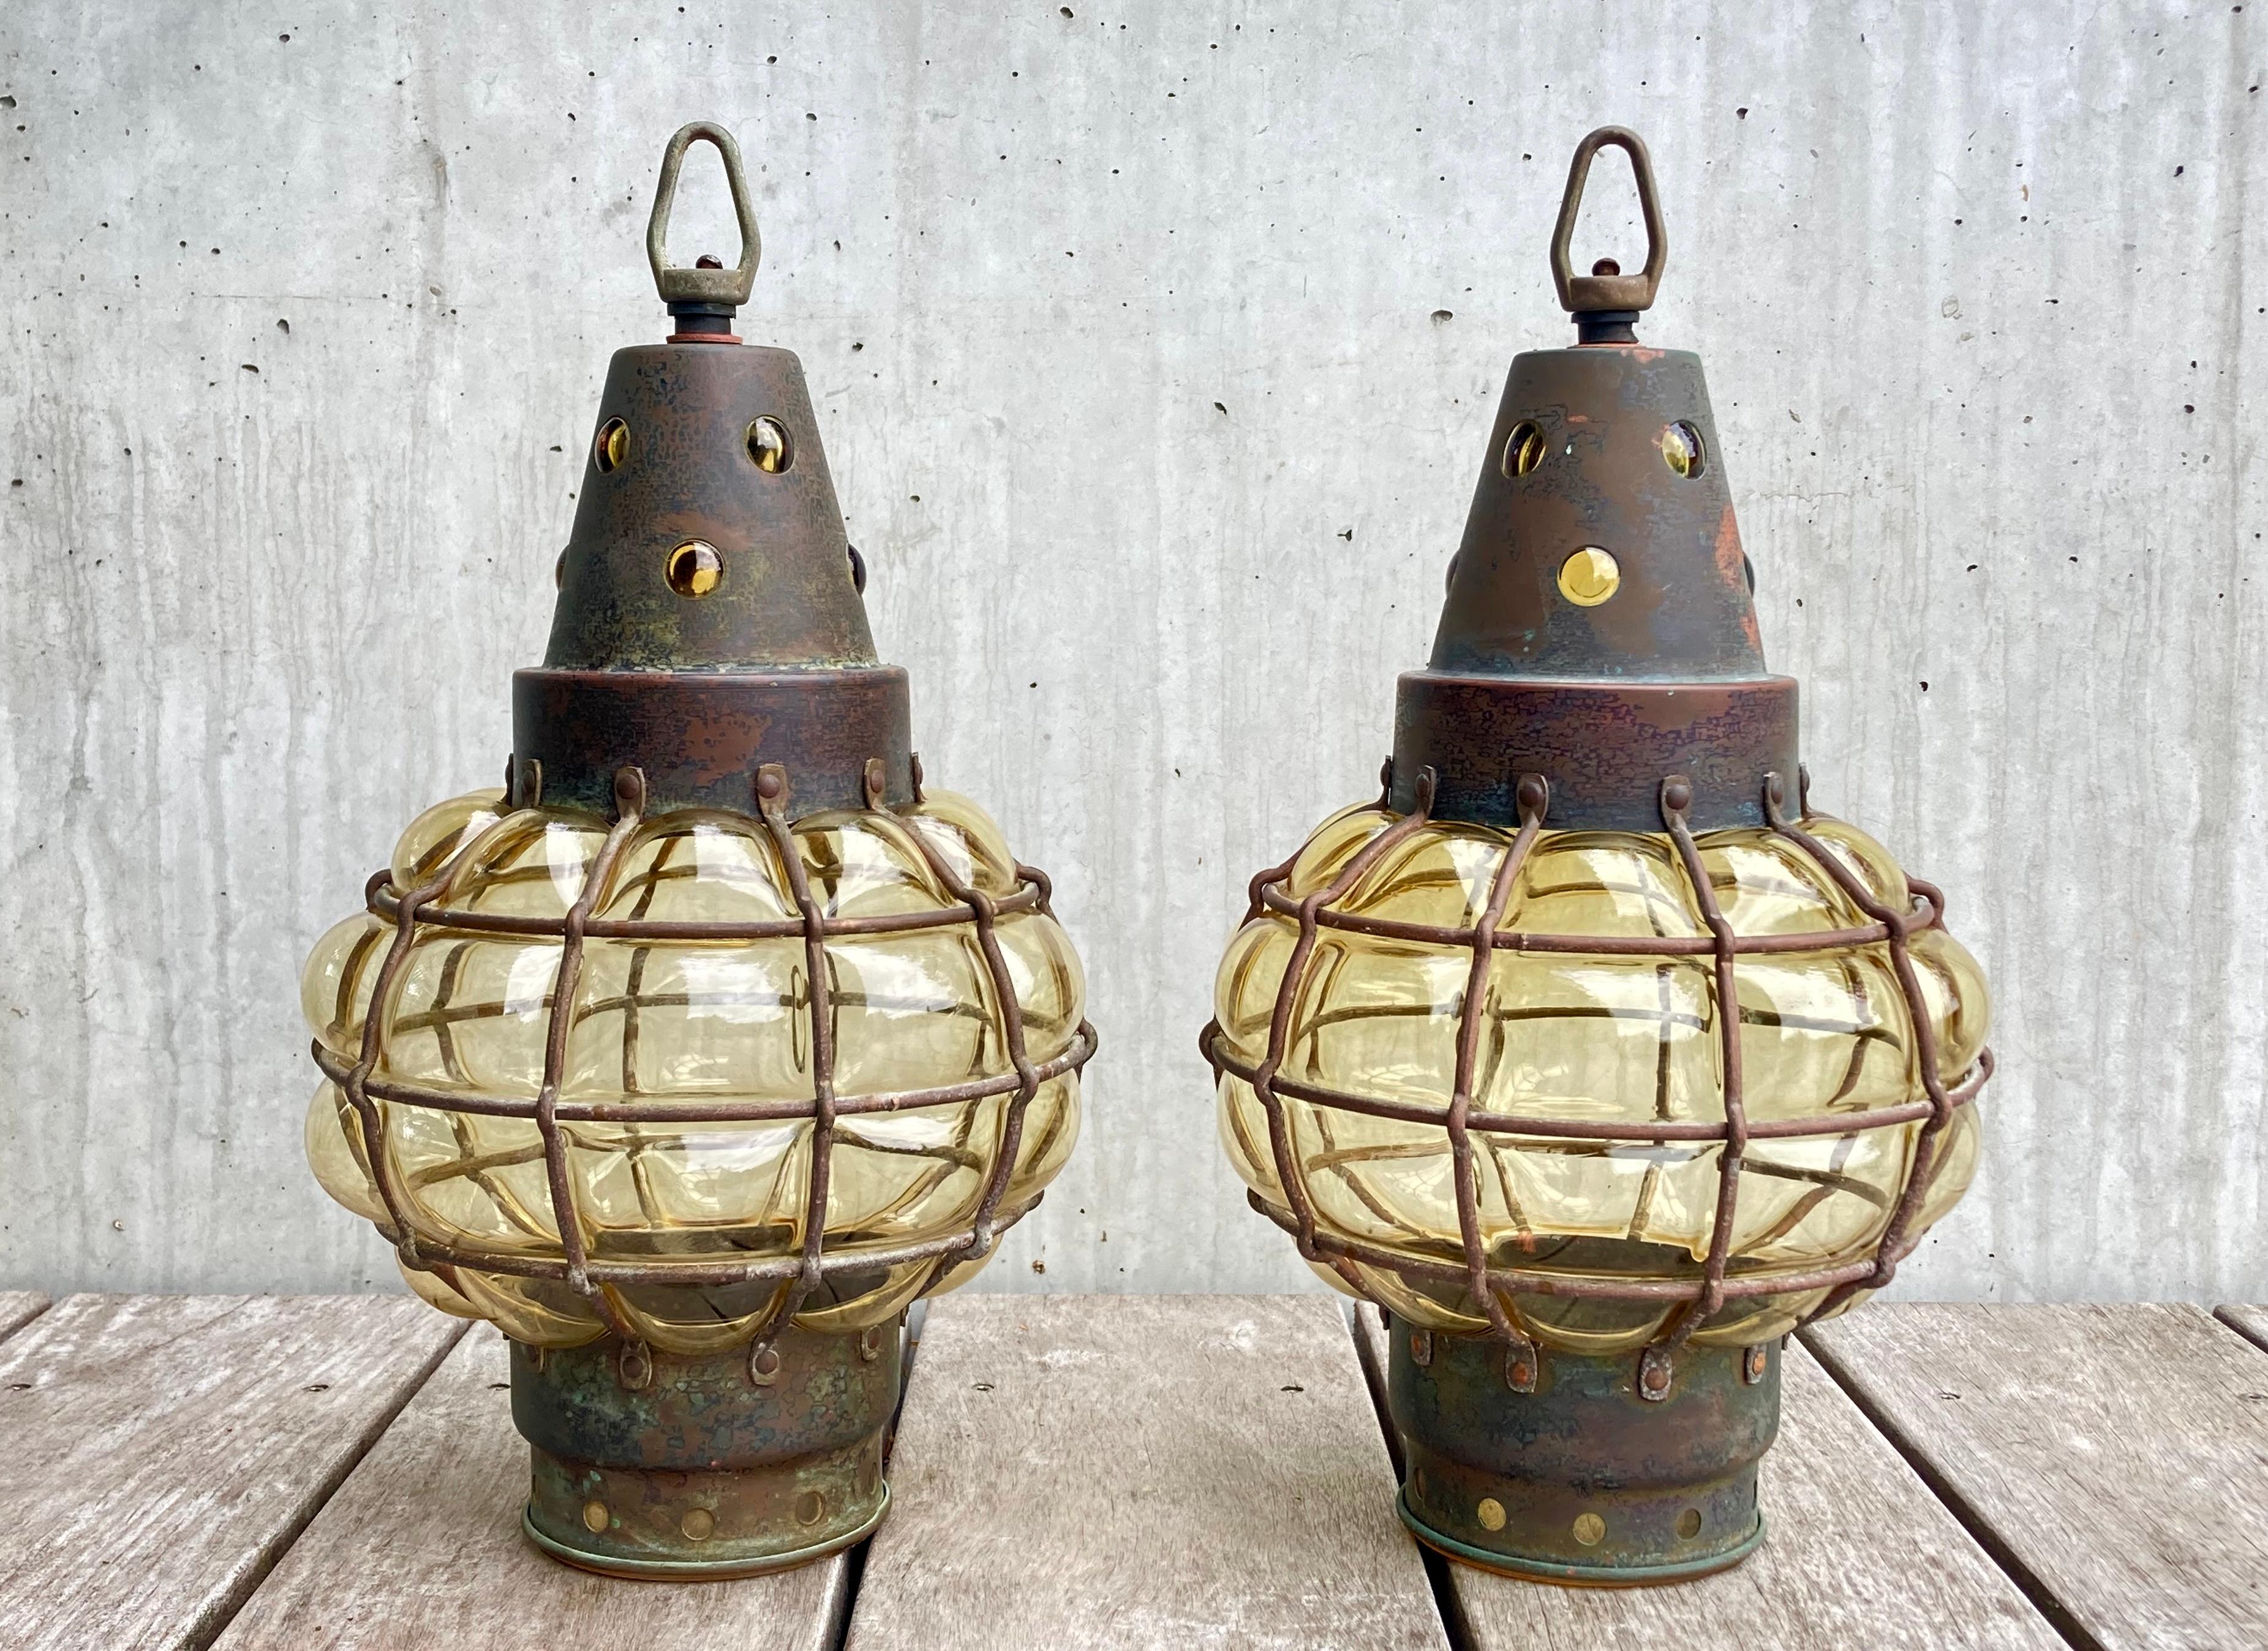 A rare set of two matching antique lanterns (pendant lamps). The lanterns have no maker's markings but most likely dates from the early 1900s. Their design is strongly inspired by the Arts and Crafts mouvement (1880-1920). The lanterns have been